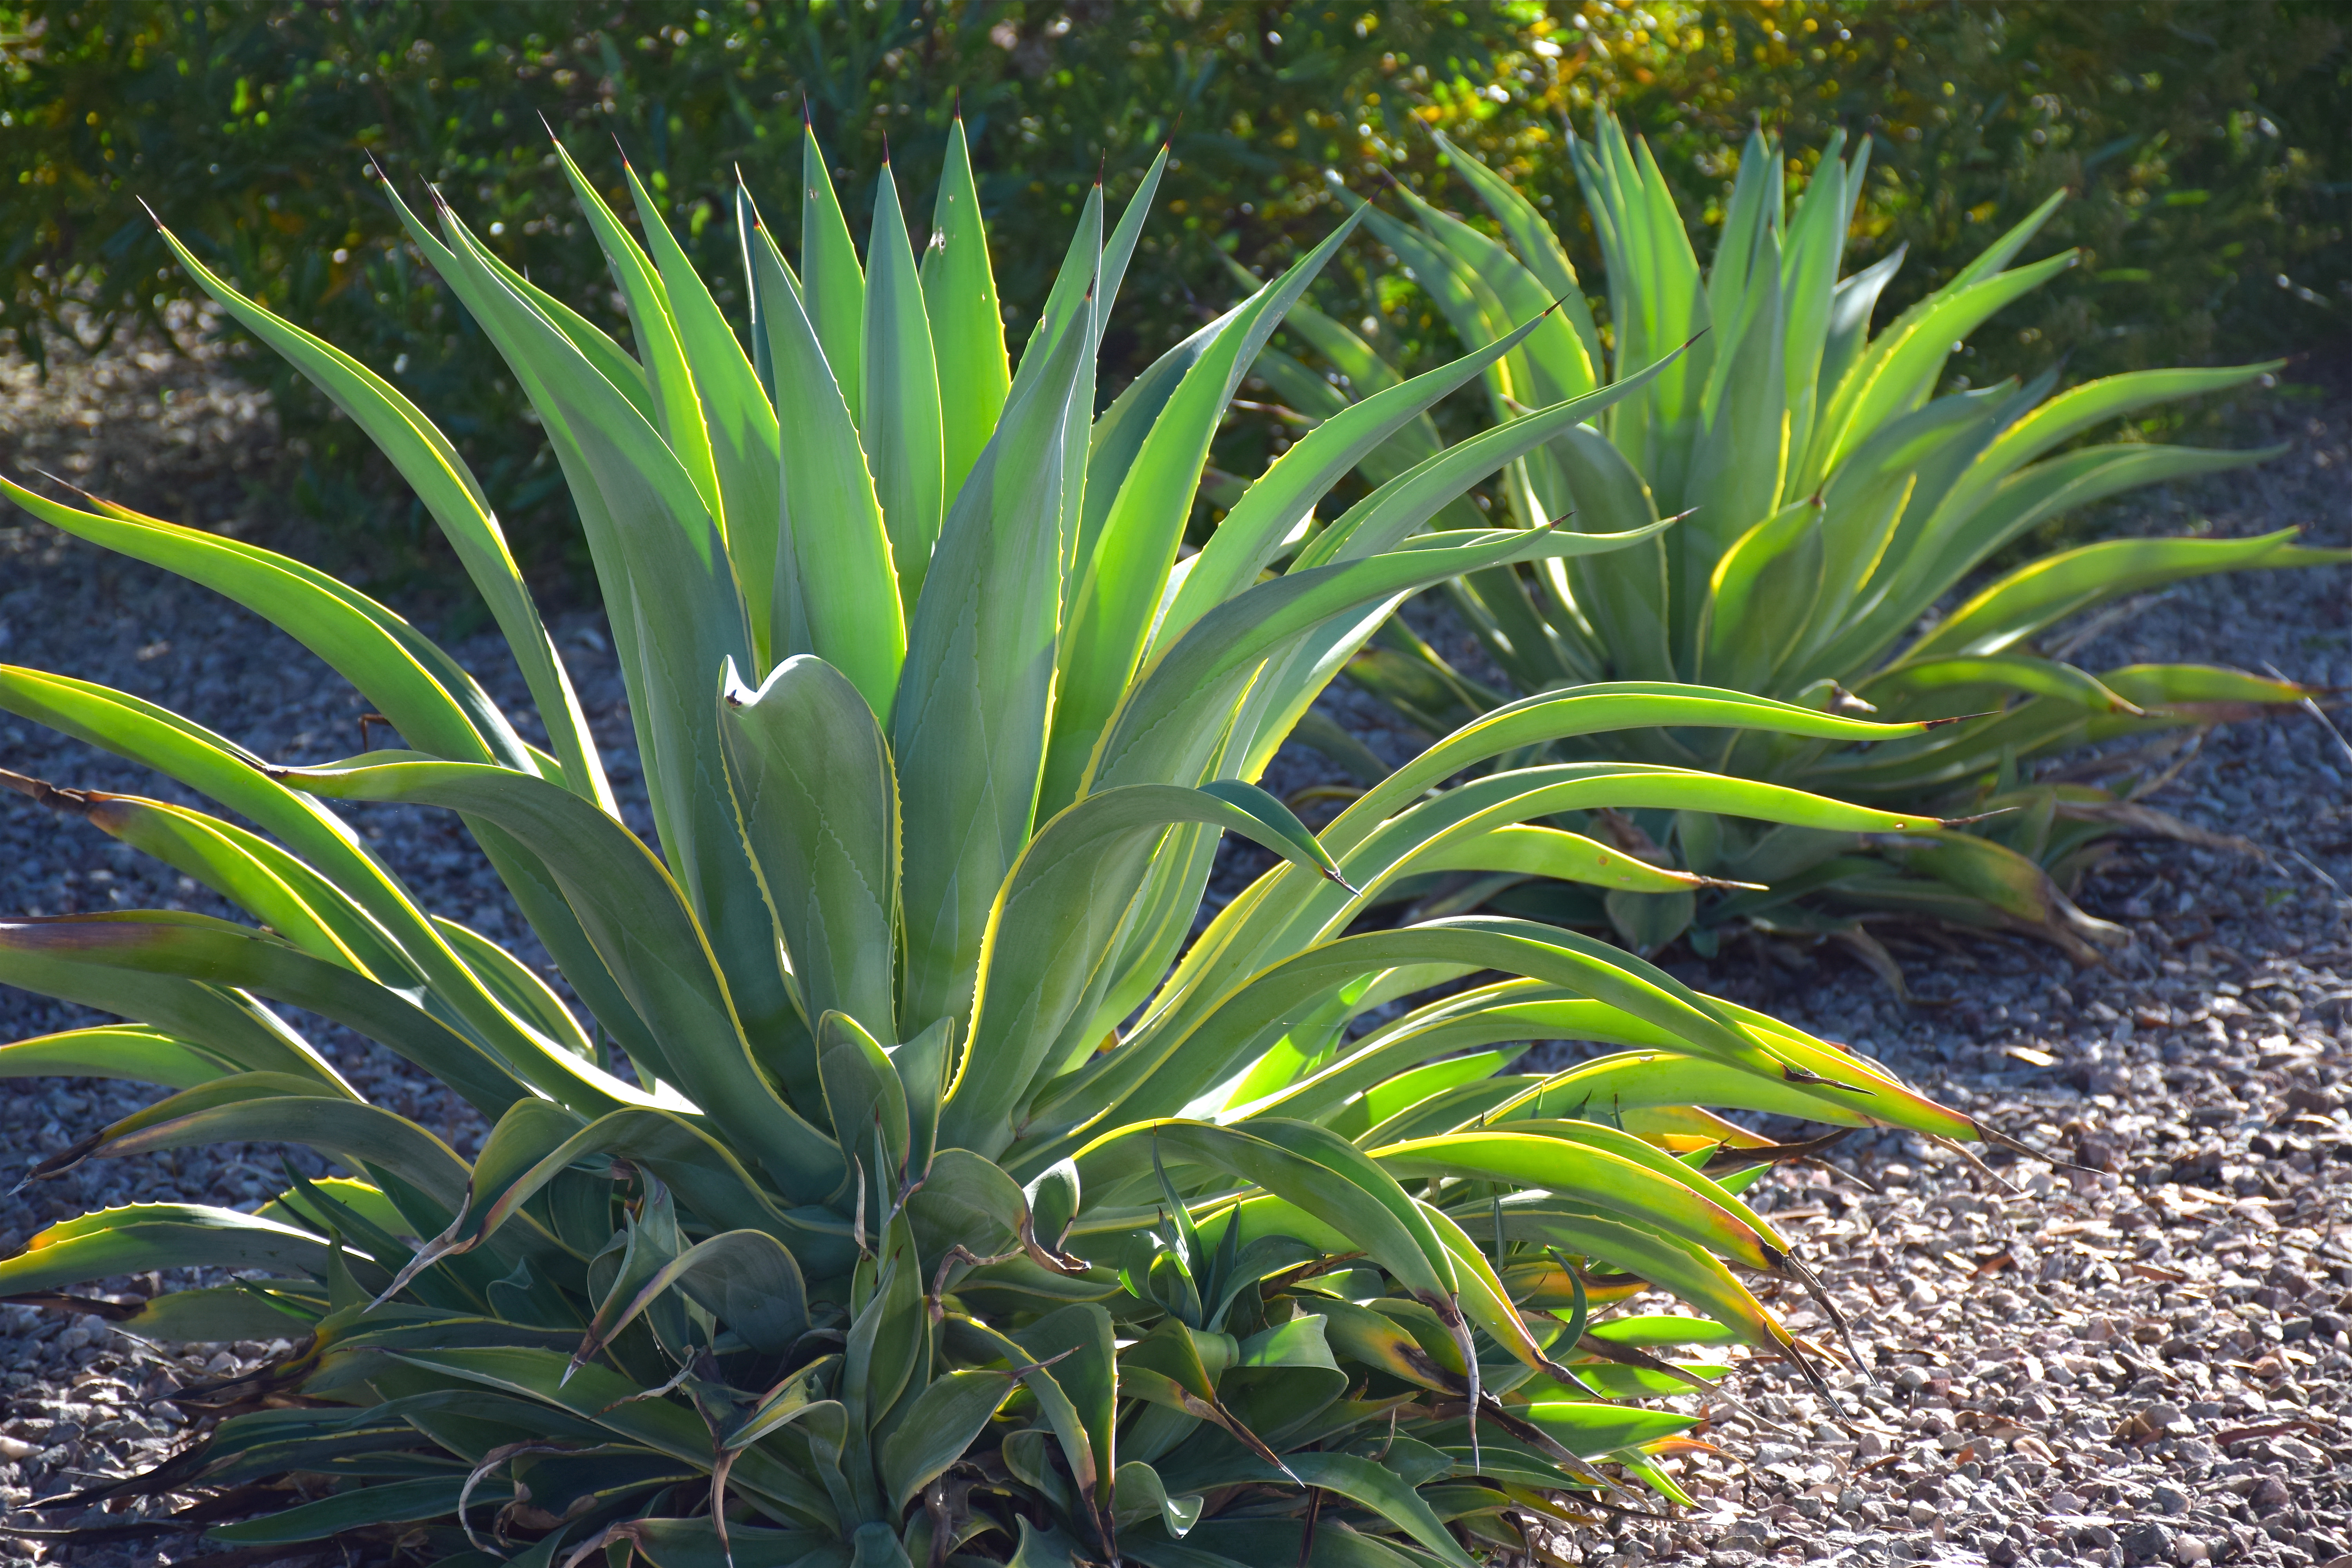 Agave plant leaves photo